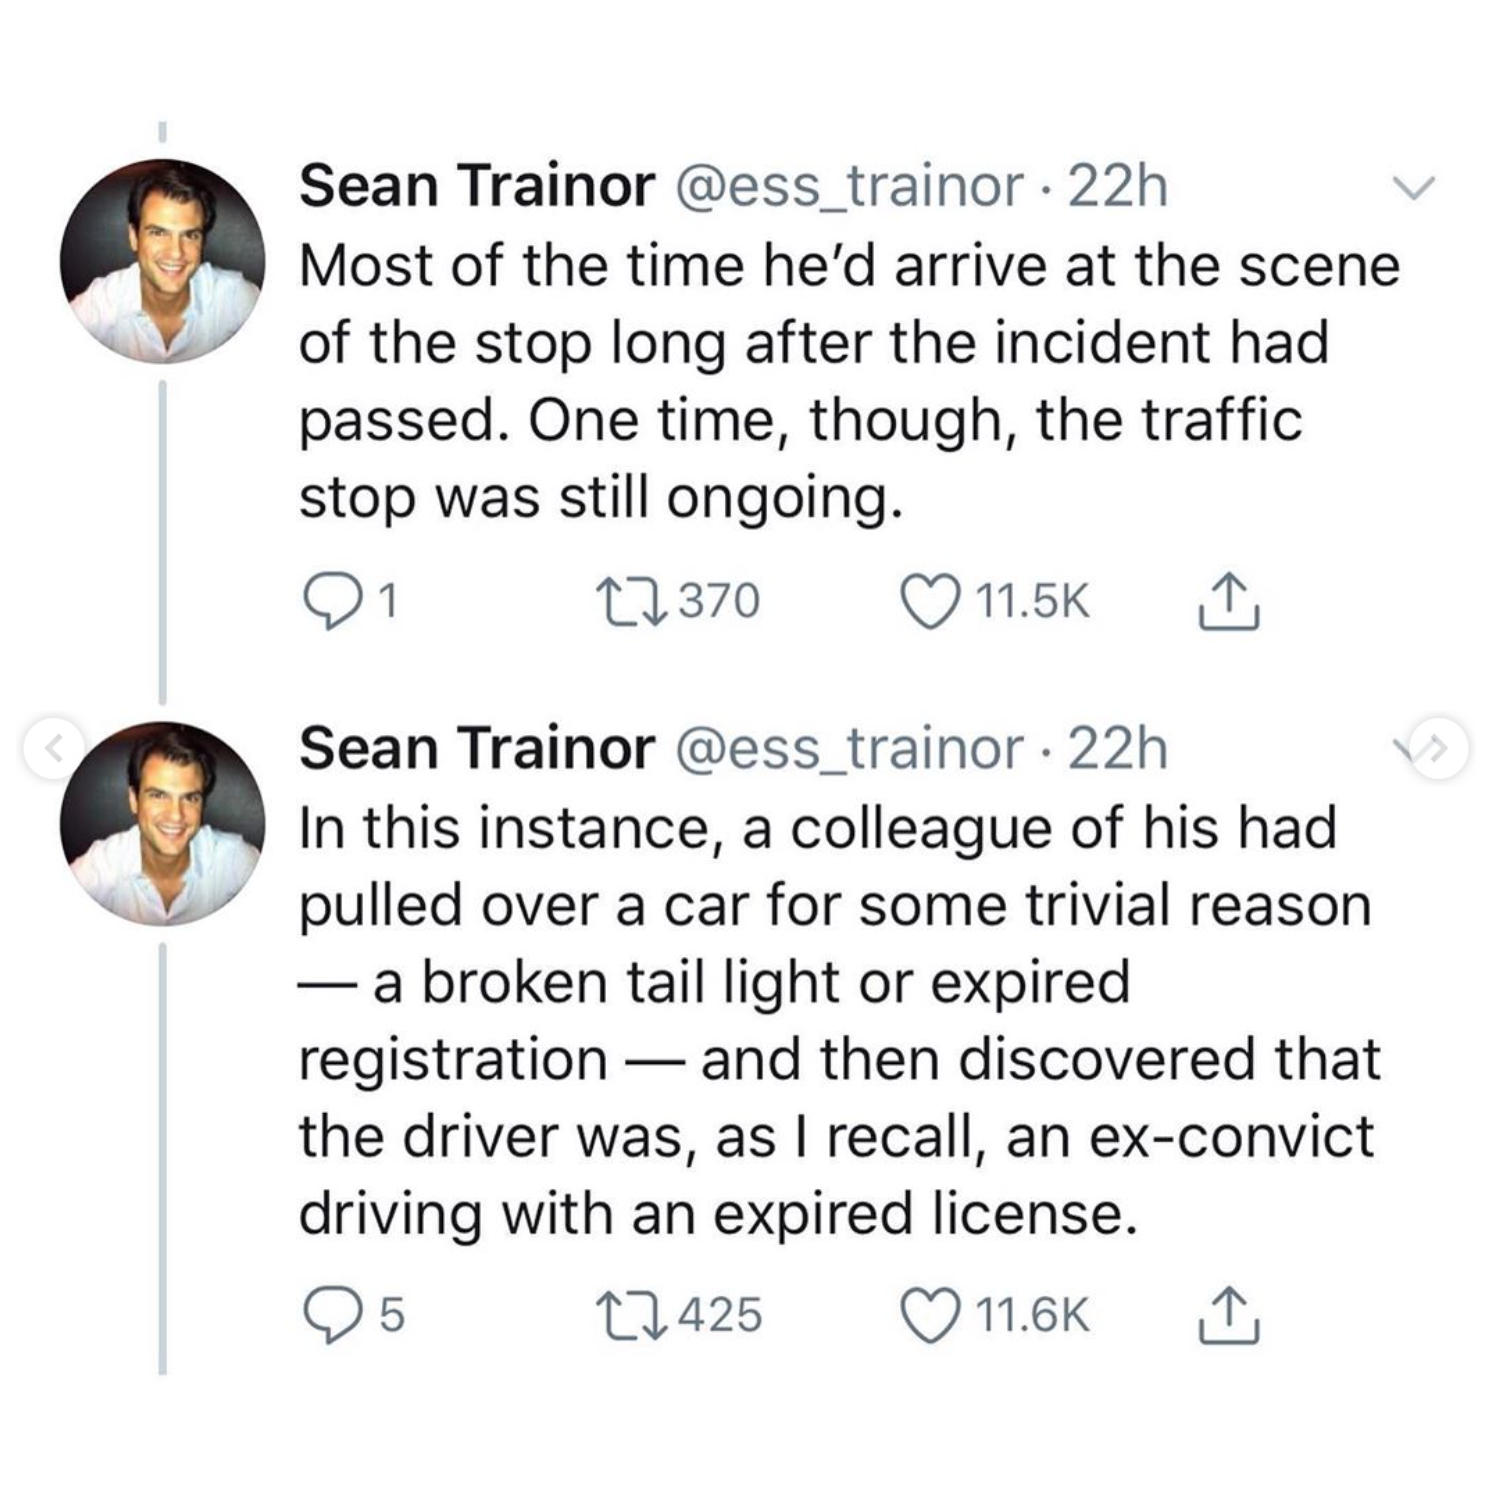 body jewelry - Sean Trainor 22h Most of the time he'd arrive at the scene of the stop long after the incident had passed. One time, though, the traffic stop was still ongoing. 22370 1 1 Sean Trainor . 22h In this instance, a colleague of his had pulled ov